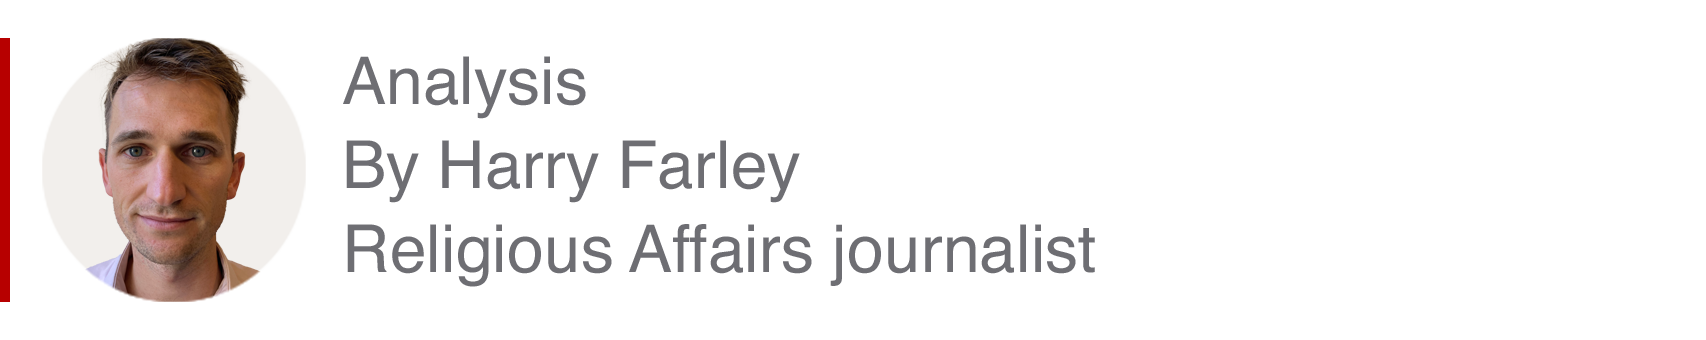 Analysis box by Harry Farley, Religious Affairs journalist